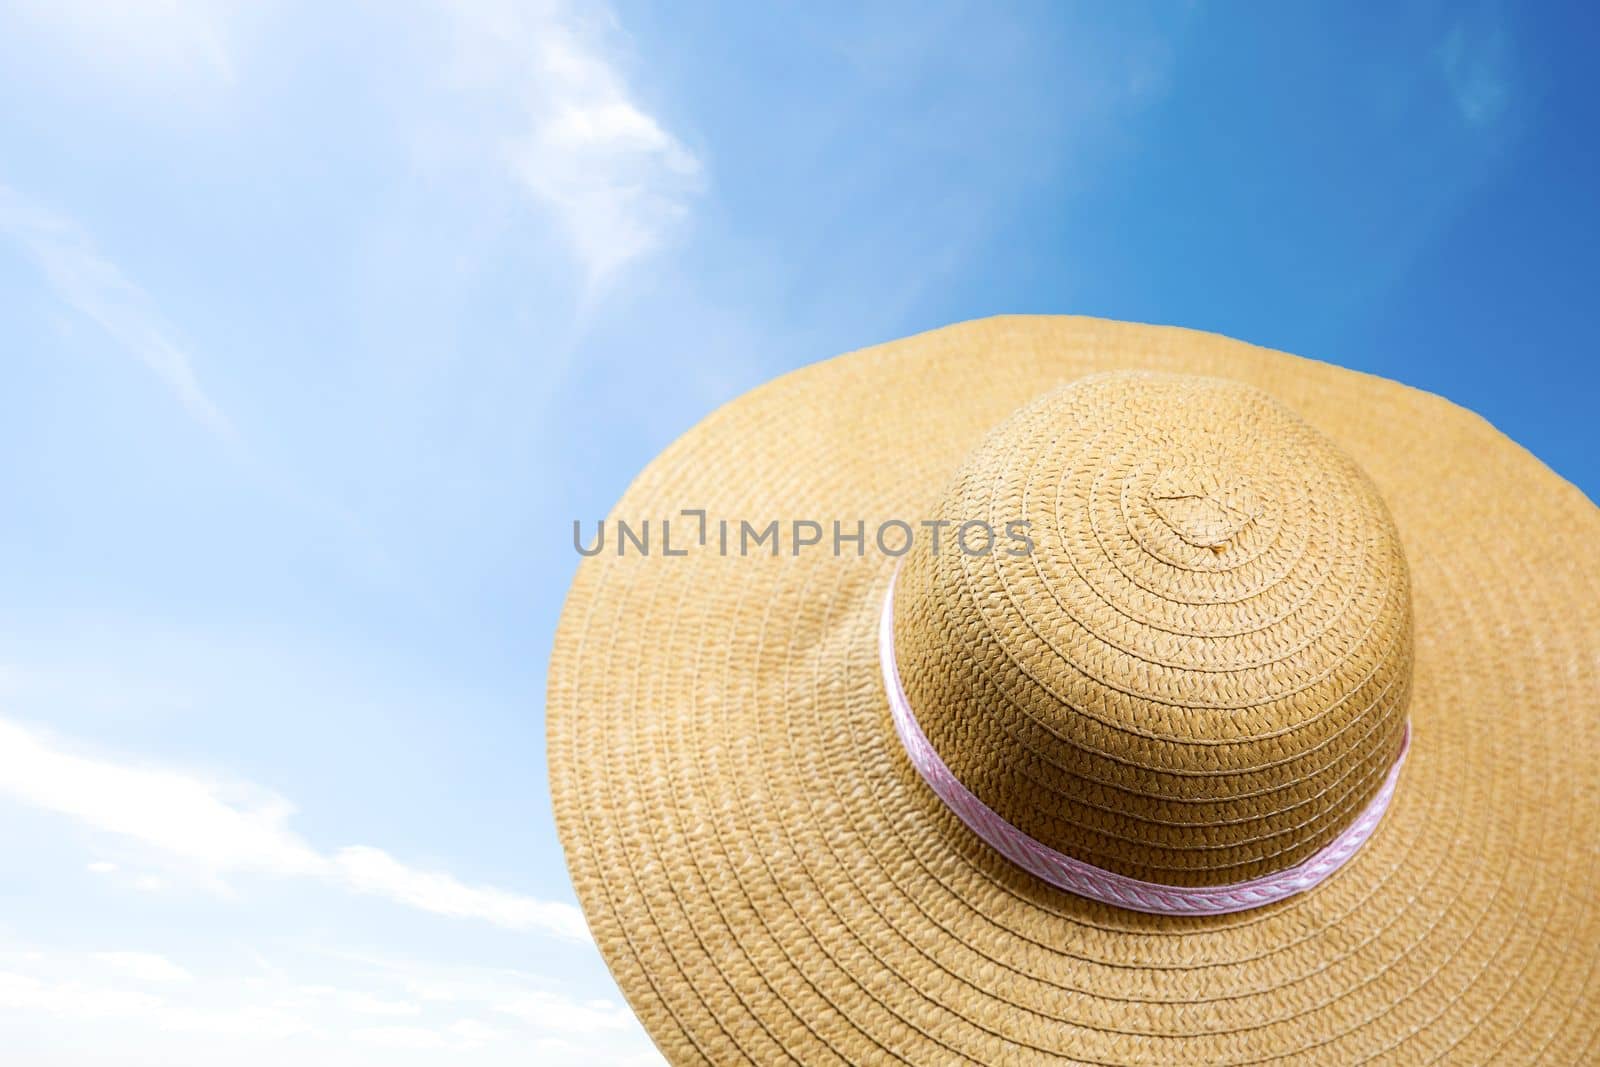 summer sunshine straw hat in blue sky on a sunny day. sunglasses summer concept with copy space blue background relaxation, Holiday,travel, beach,sun concept close up